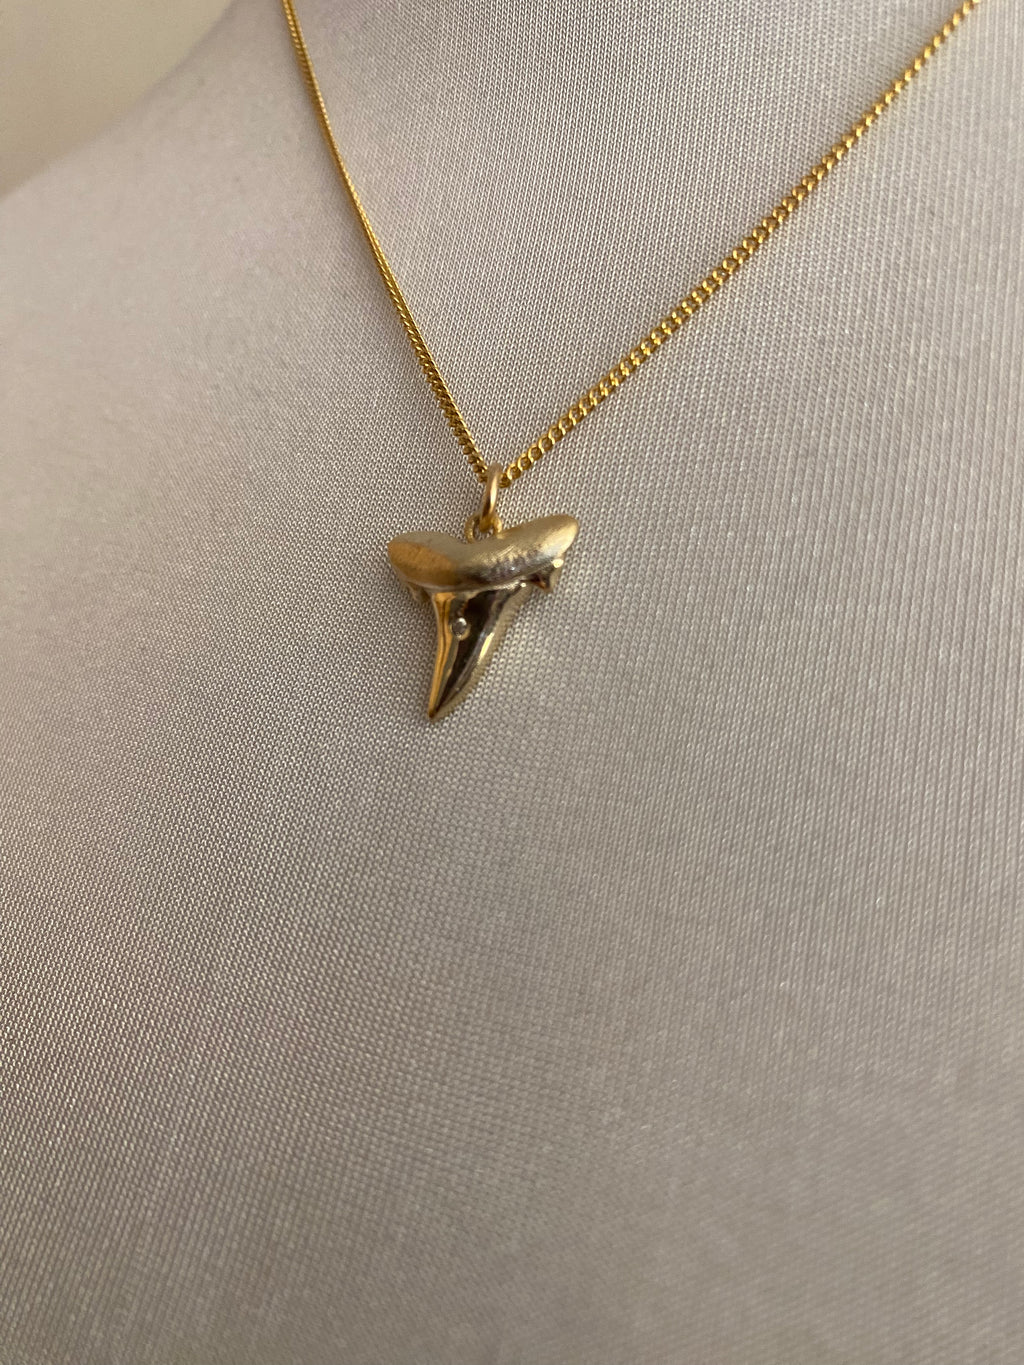 Crystal Shark Tooth Necklace